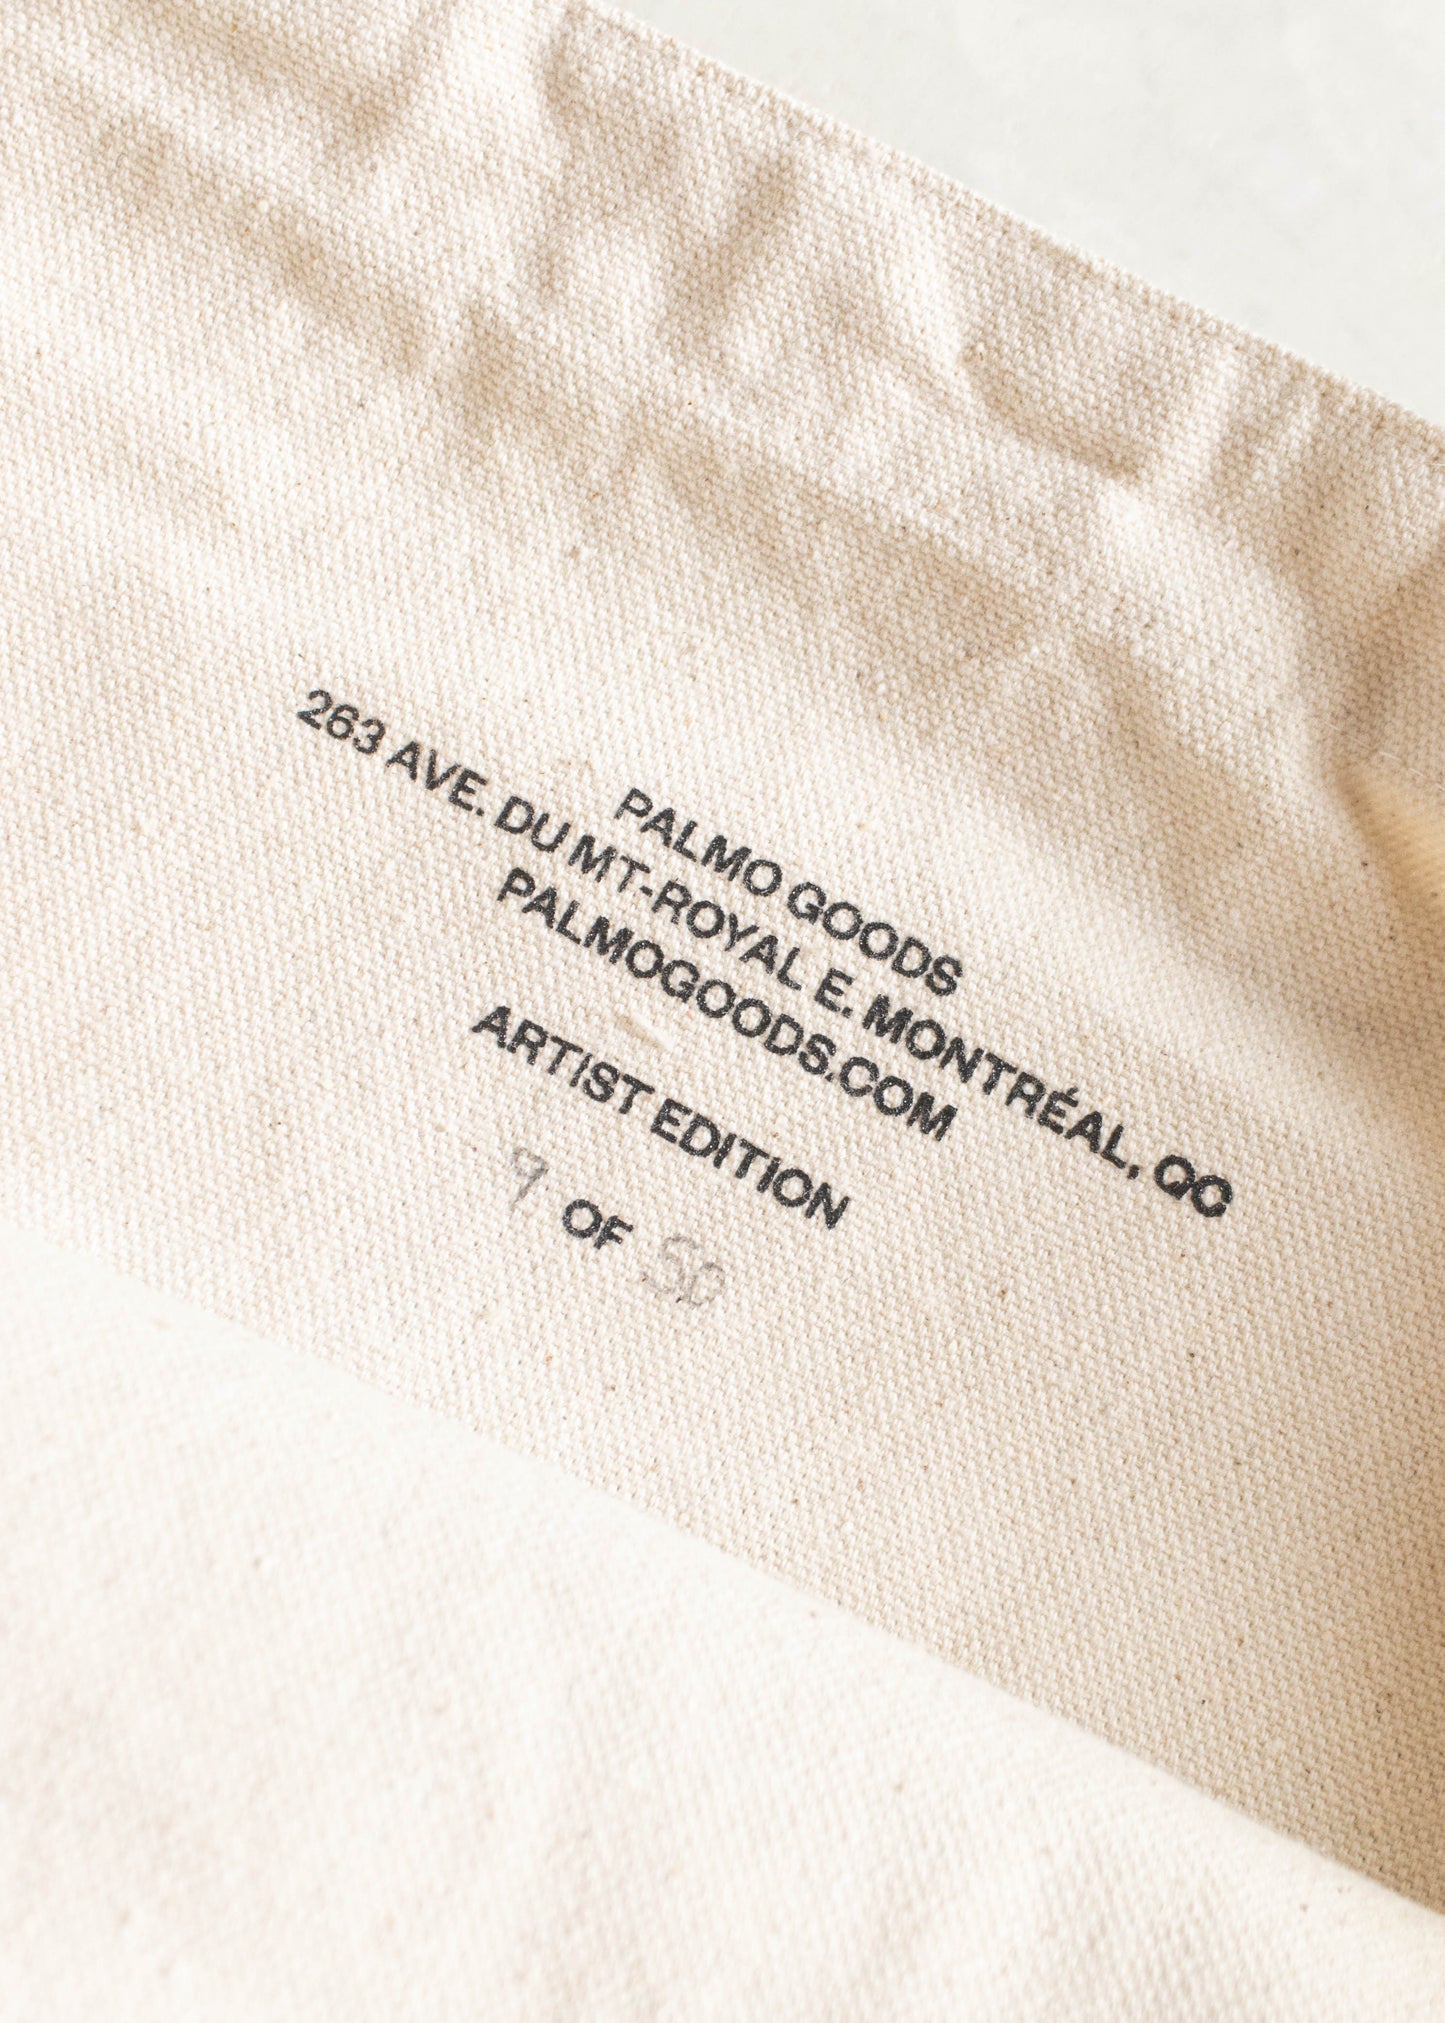 Esther Mulders X Palmo Goods Artist Edition Tote Bag